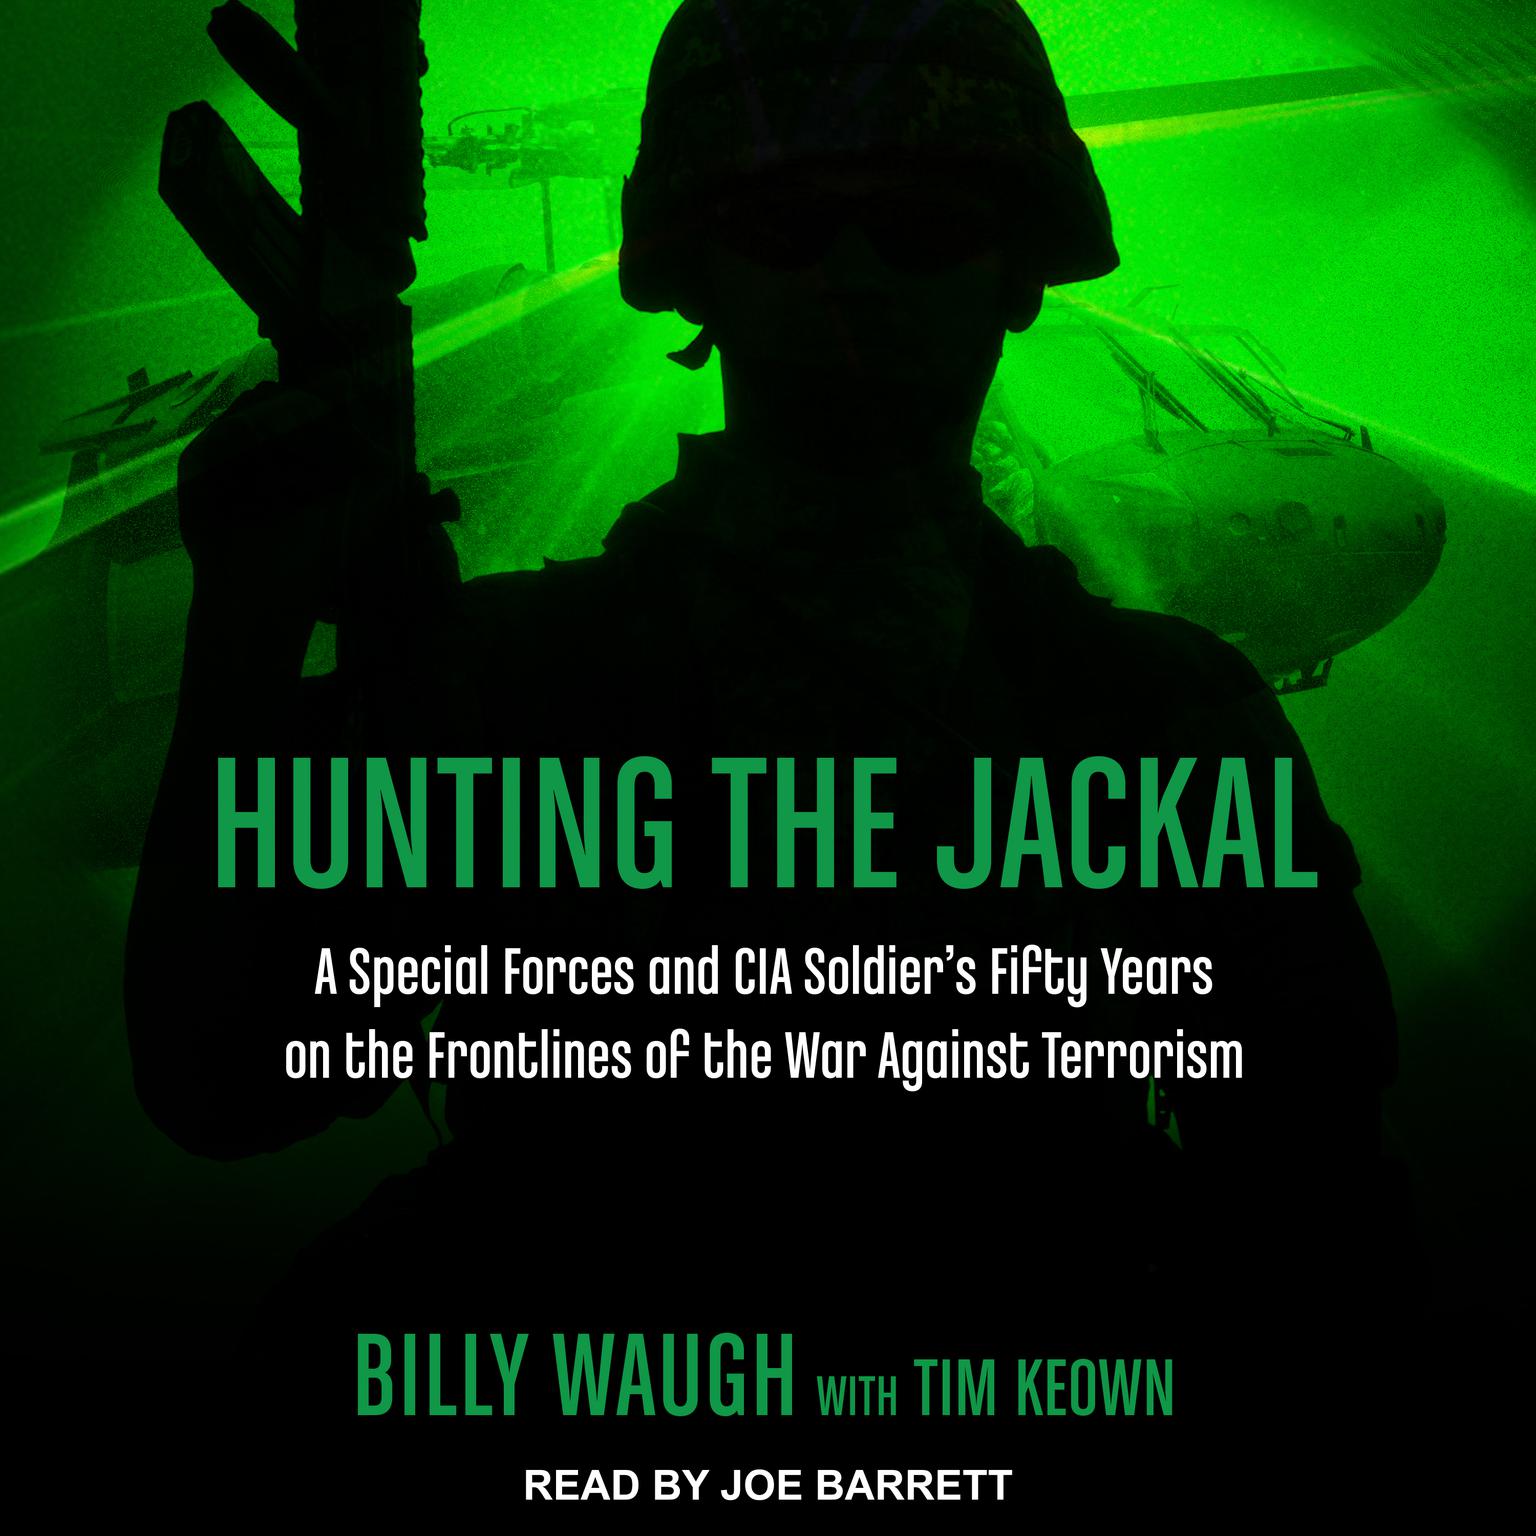 Hunting the Jackal: A Special Forces and CIA Soldiers Fifty Years on the Frontlines of the War Against Terrorism Audiobook, by Billy Waugh